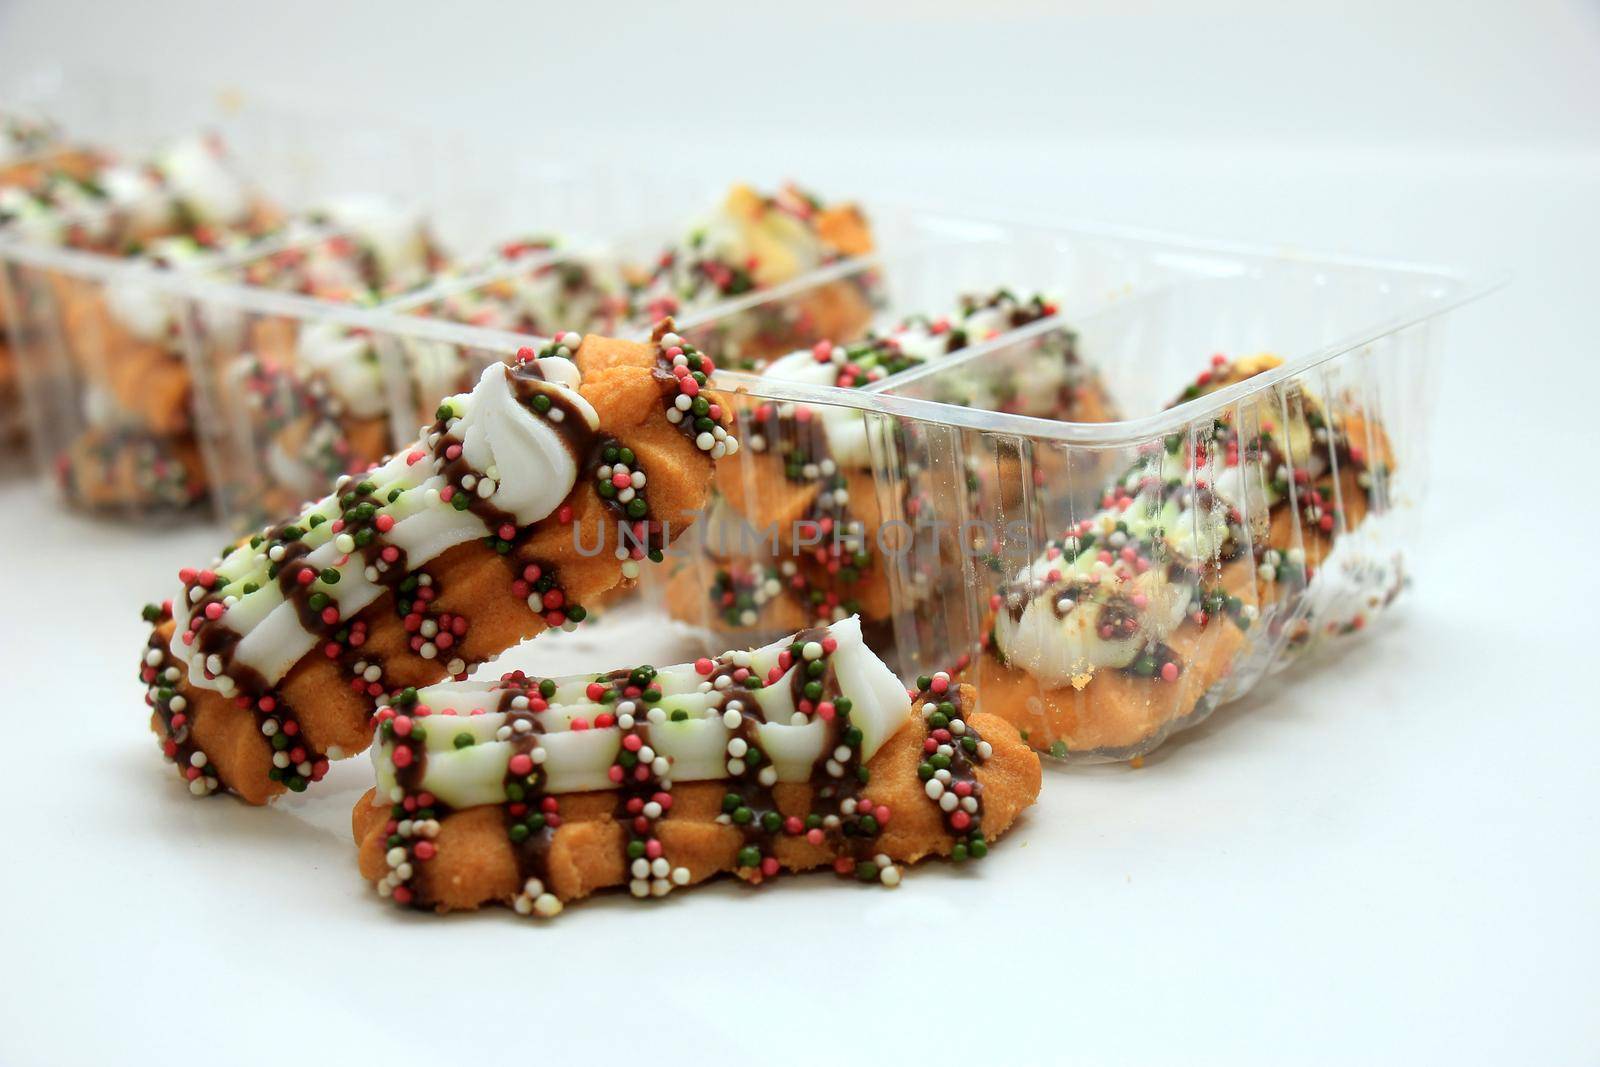 Crispy Christmas Cookies decorated with chocolate and sprinkles